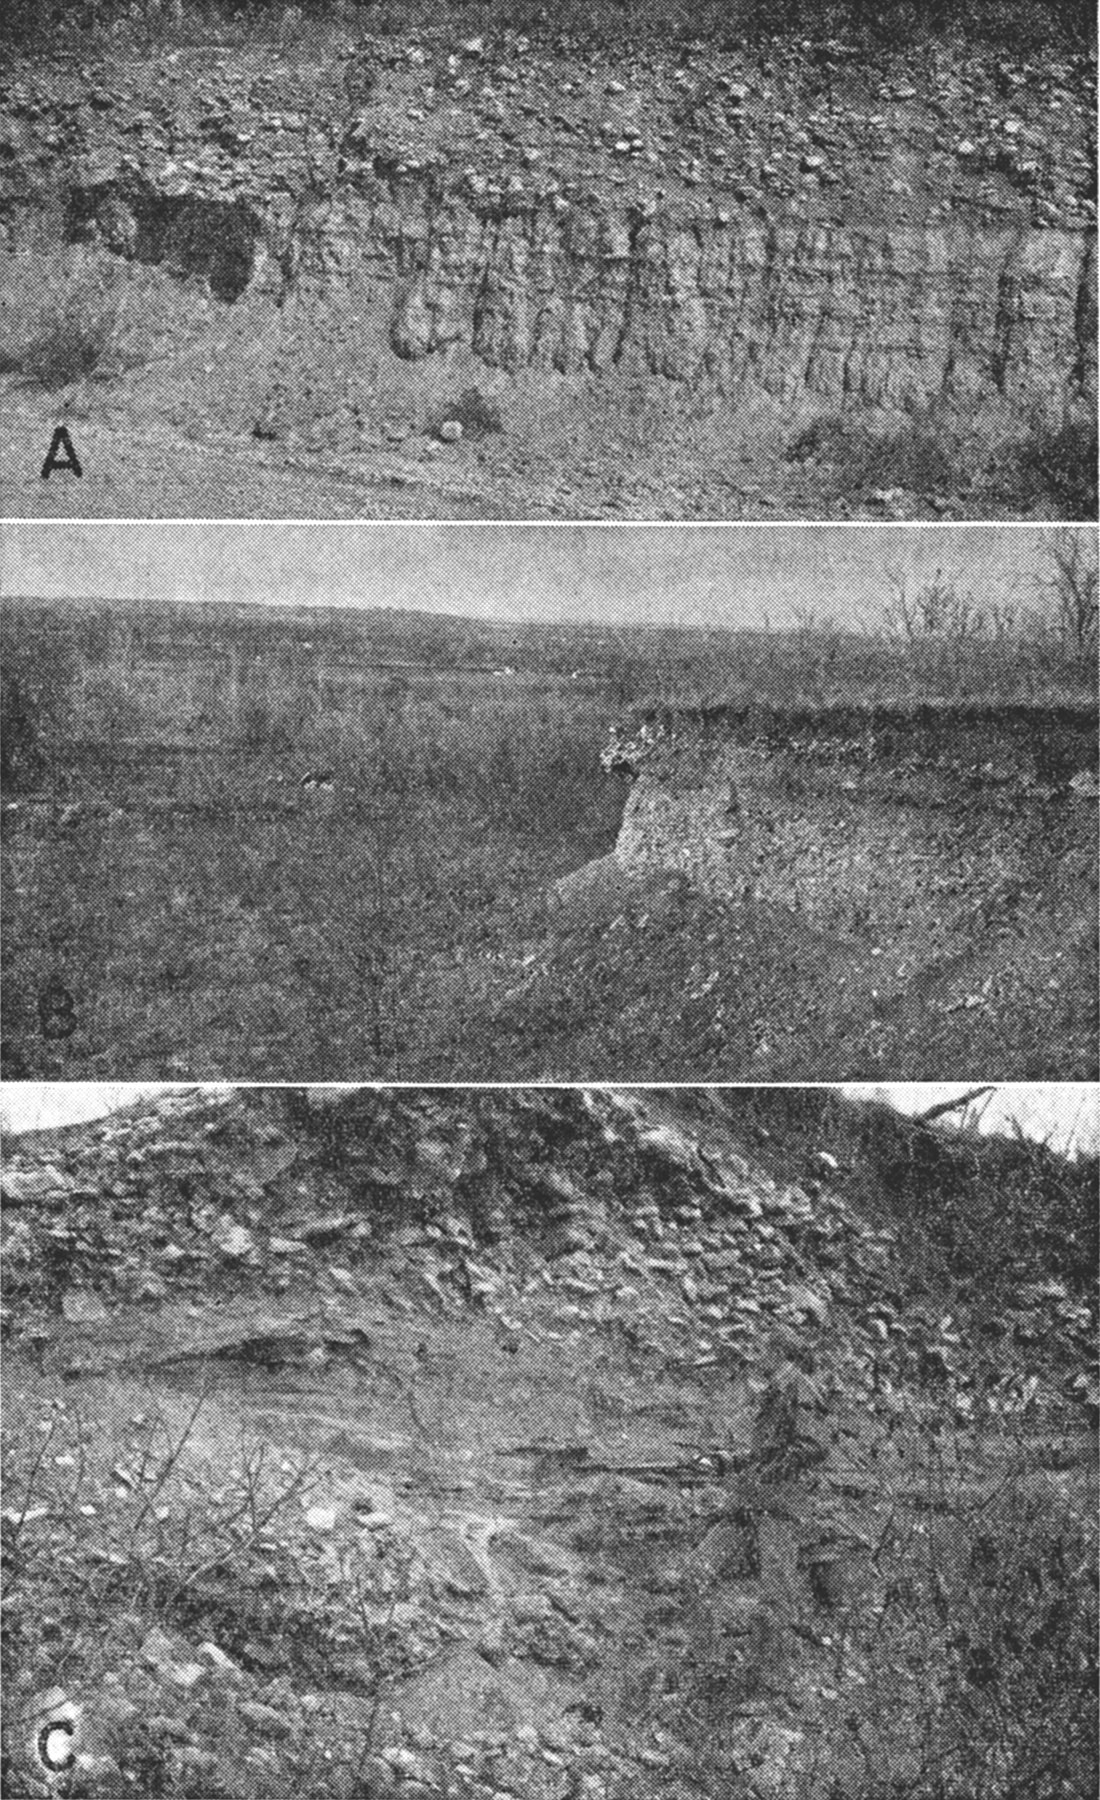 Three black and white photos; upper is of Kansas Till overlying beds of Atchison Formation; middle is of Kansan gravels capping Shank Hill; lower is closeup view of Kansan deposits capping Shank Hill.